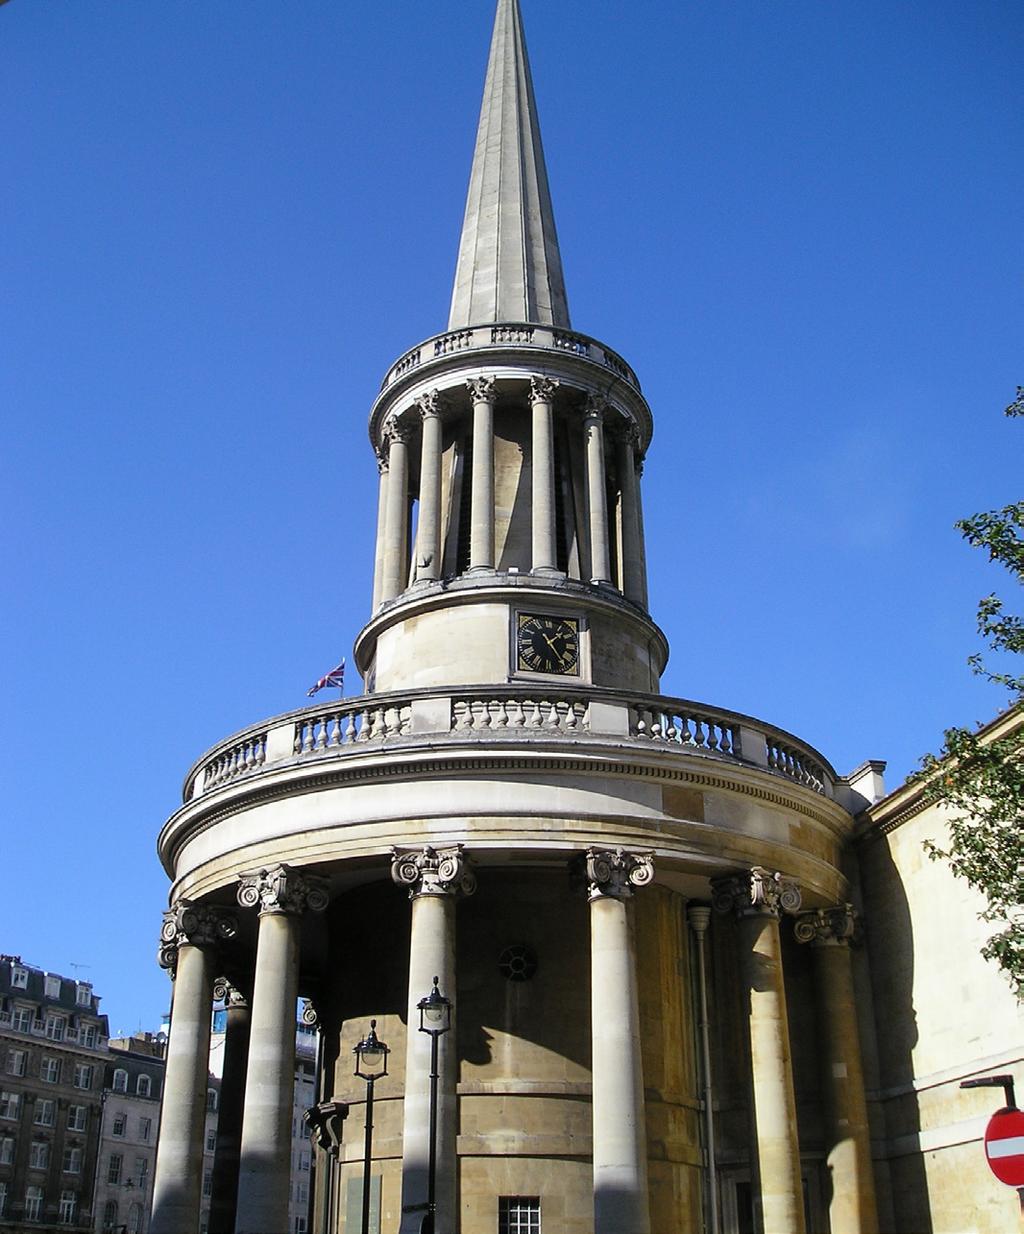 Day 7: Sunday 2 - Today we will attend church at All Souls, Langham Place, in central London. A walk through St James s Park to see Buckingham Palace will follow.